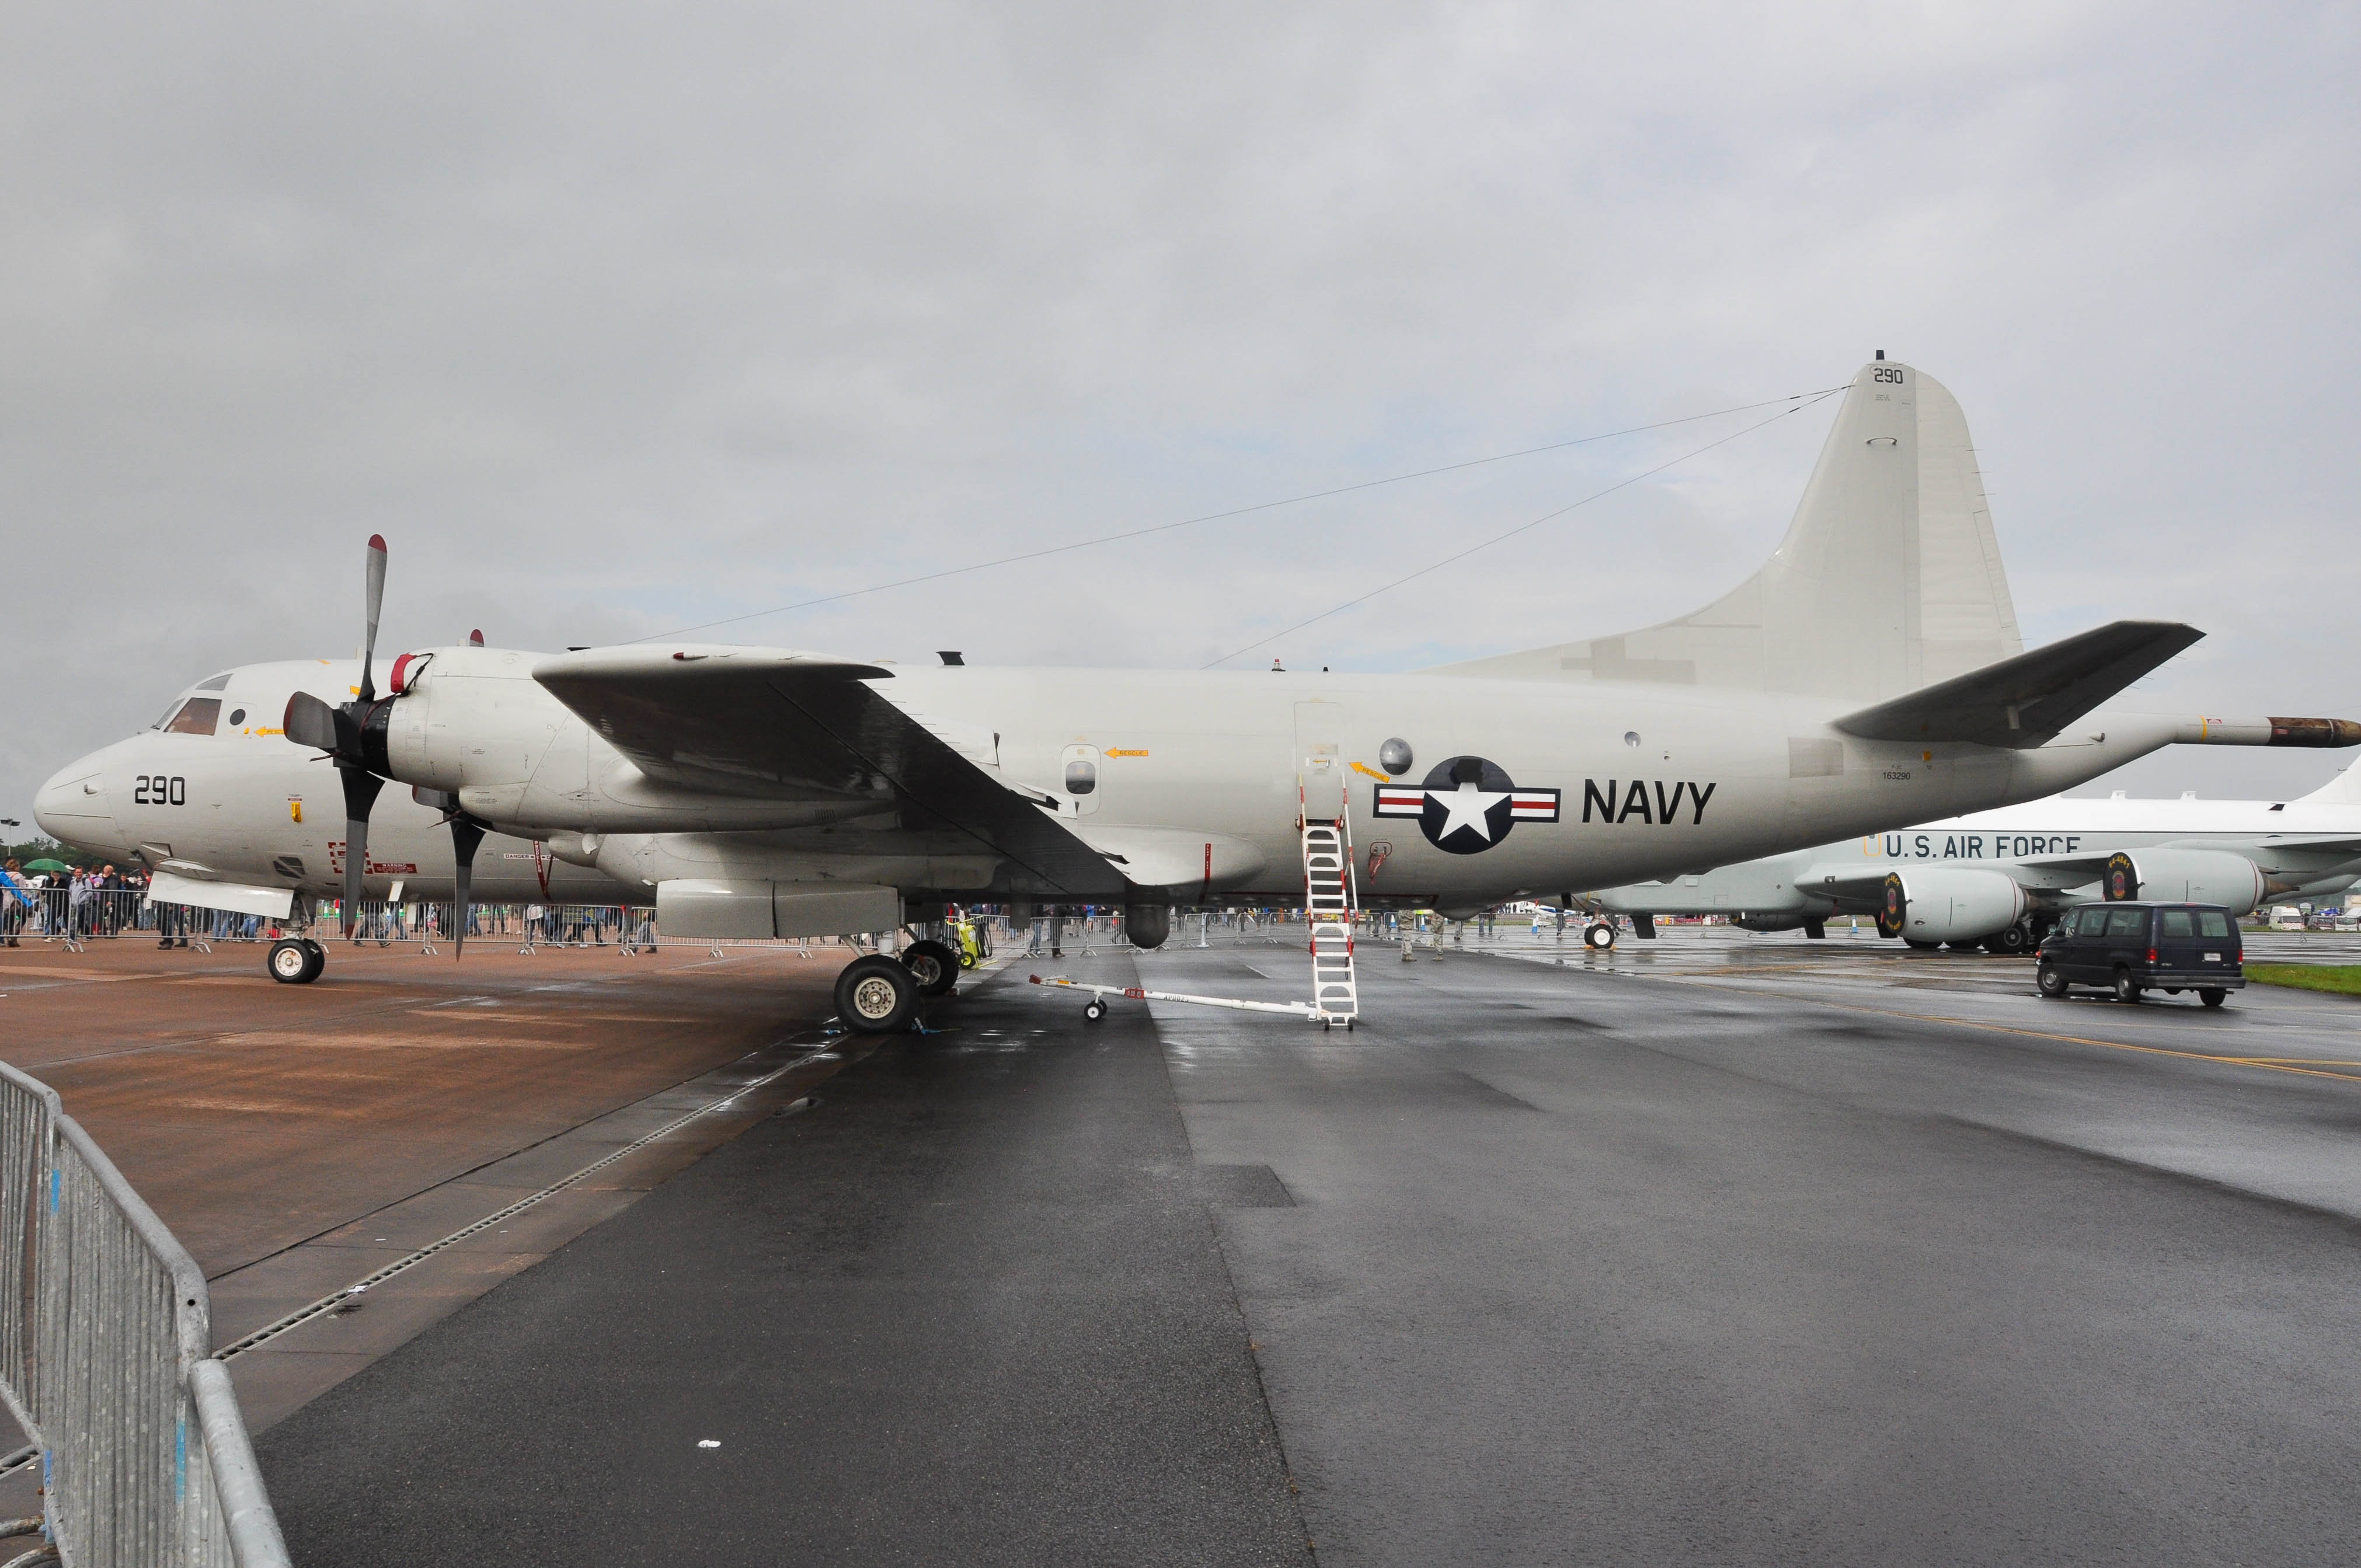 163290/163290 USN - United States Navy Lockheed P-3C AIP+ ARTR Orion Photo by colinw - AVSpotters.com